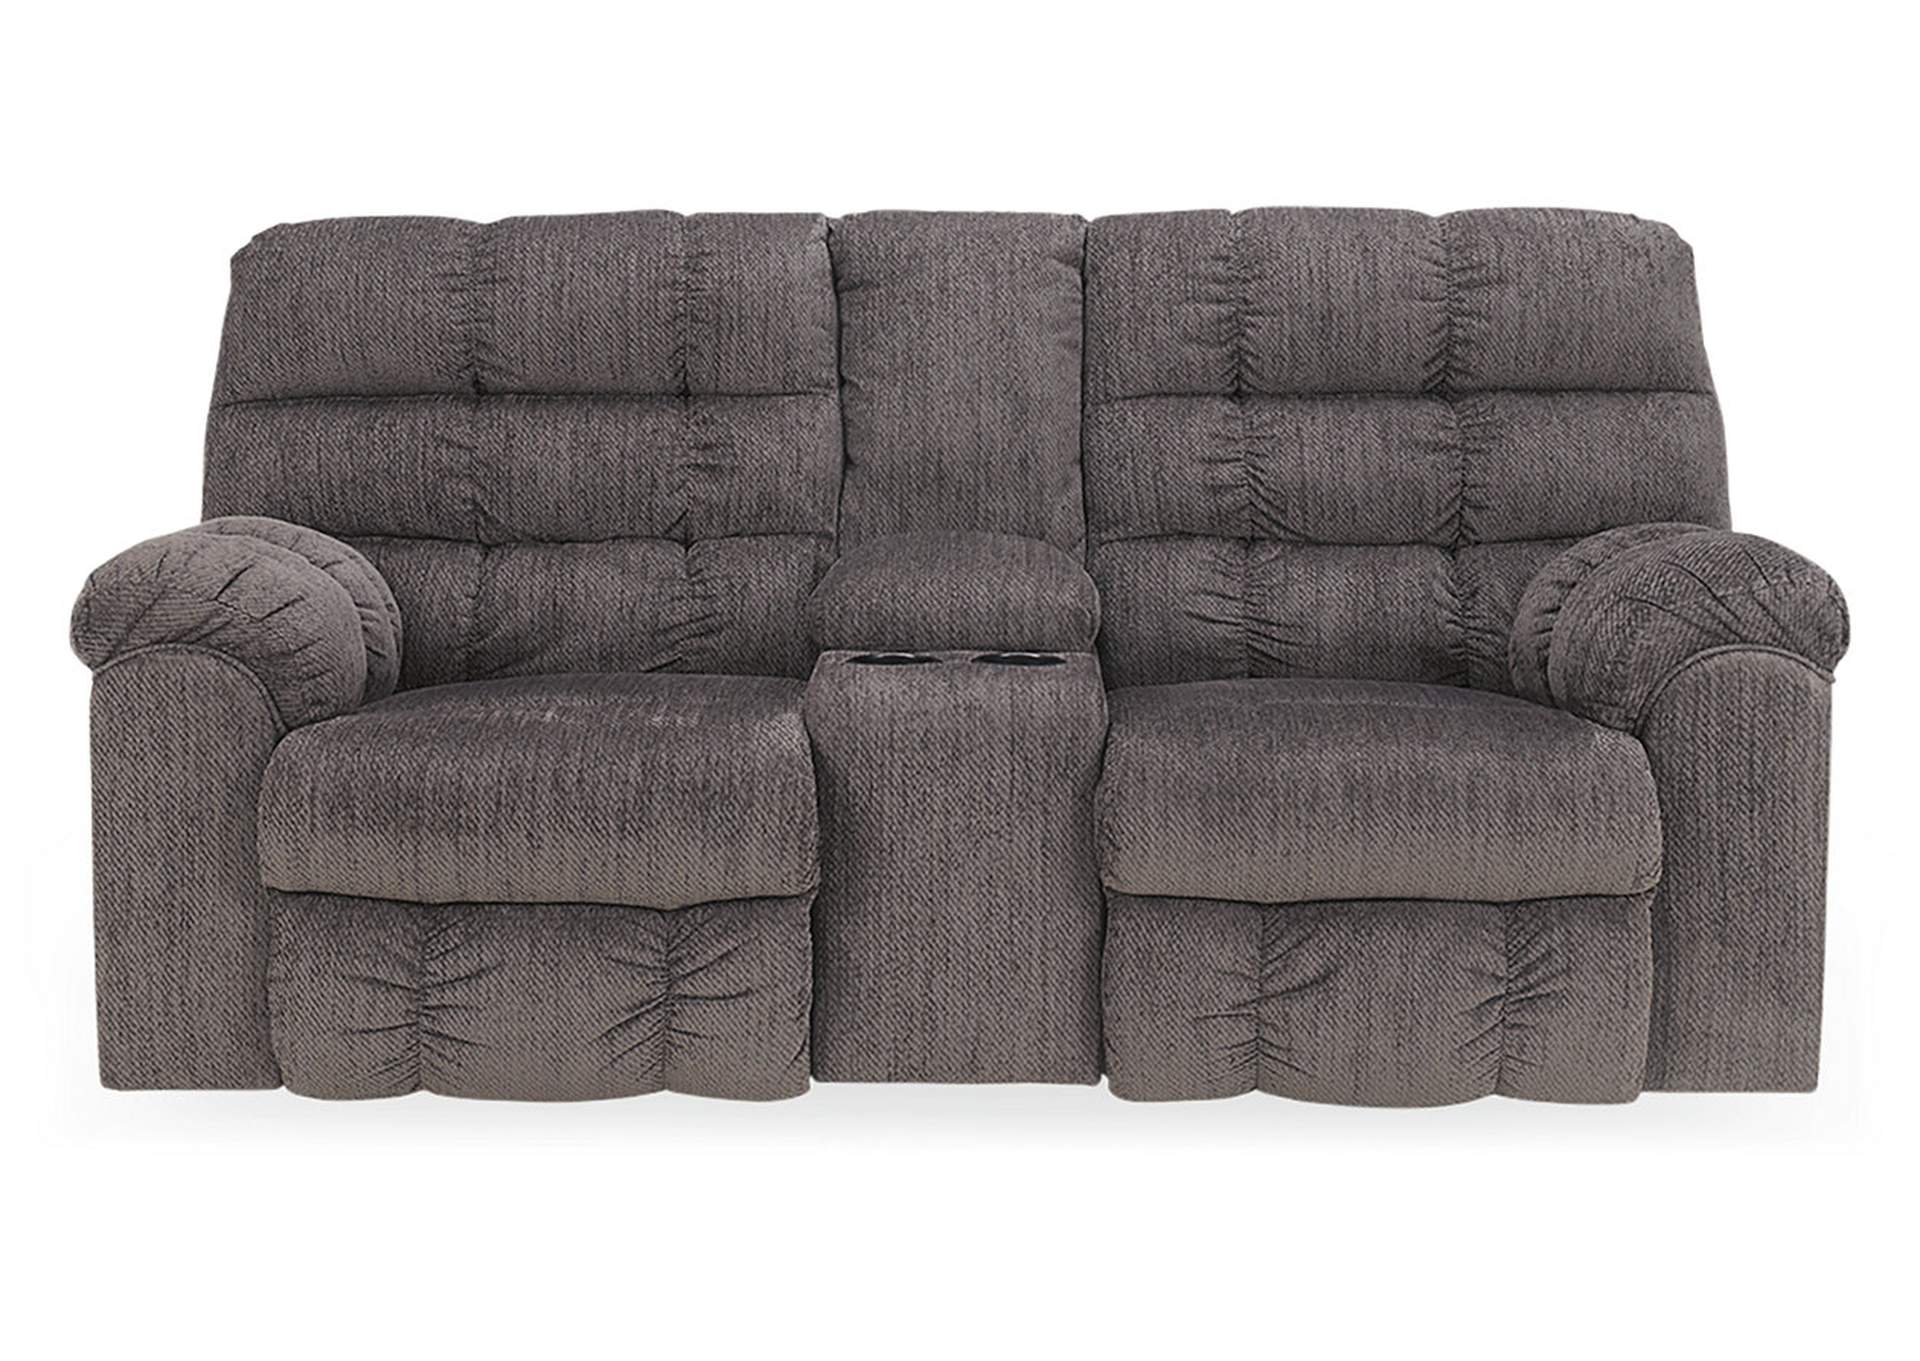 Acieona Reclining Sofa, Loveseat and Recliner,Signature Design By Ashley